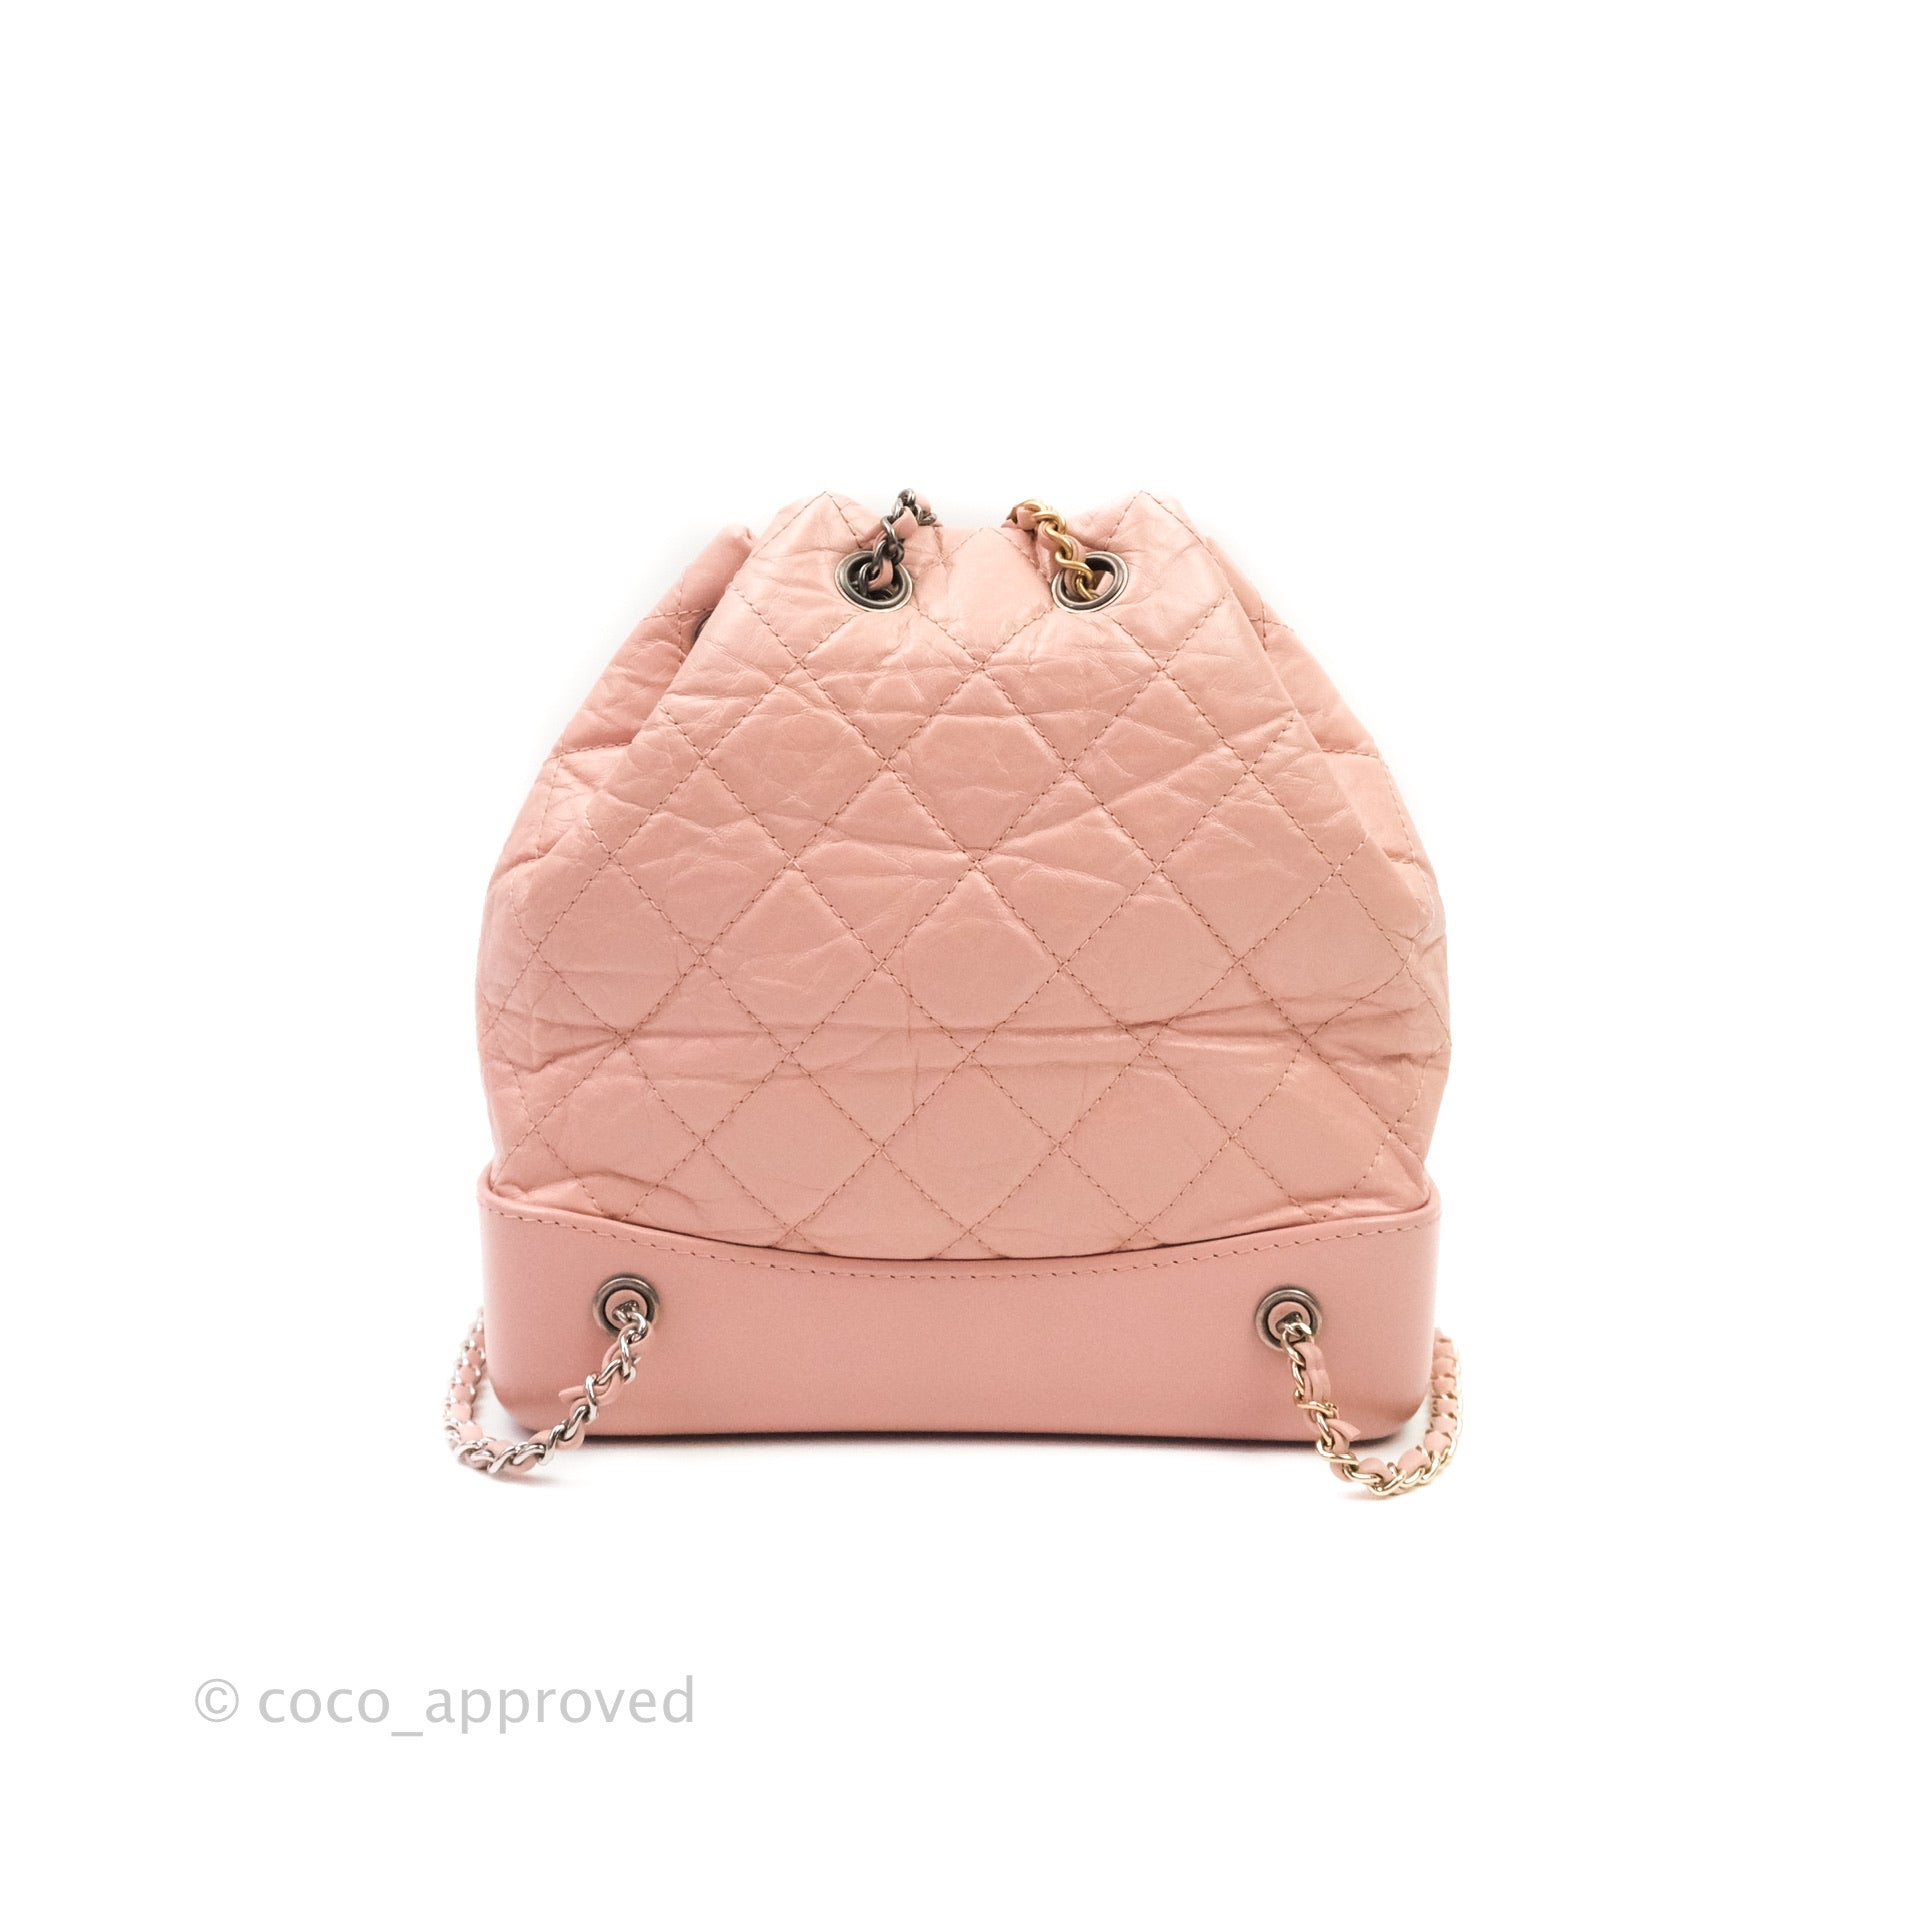 Authentic Chanel Small Gabrielle Hobo Bag Pink